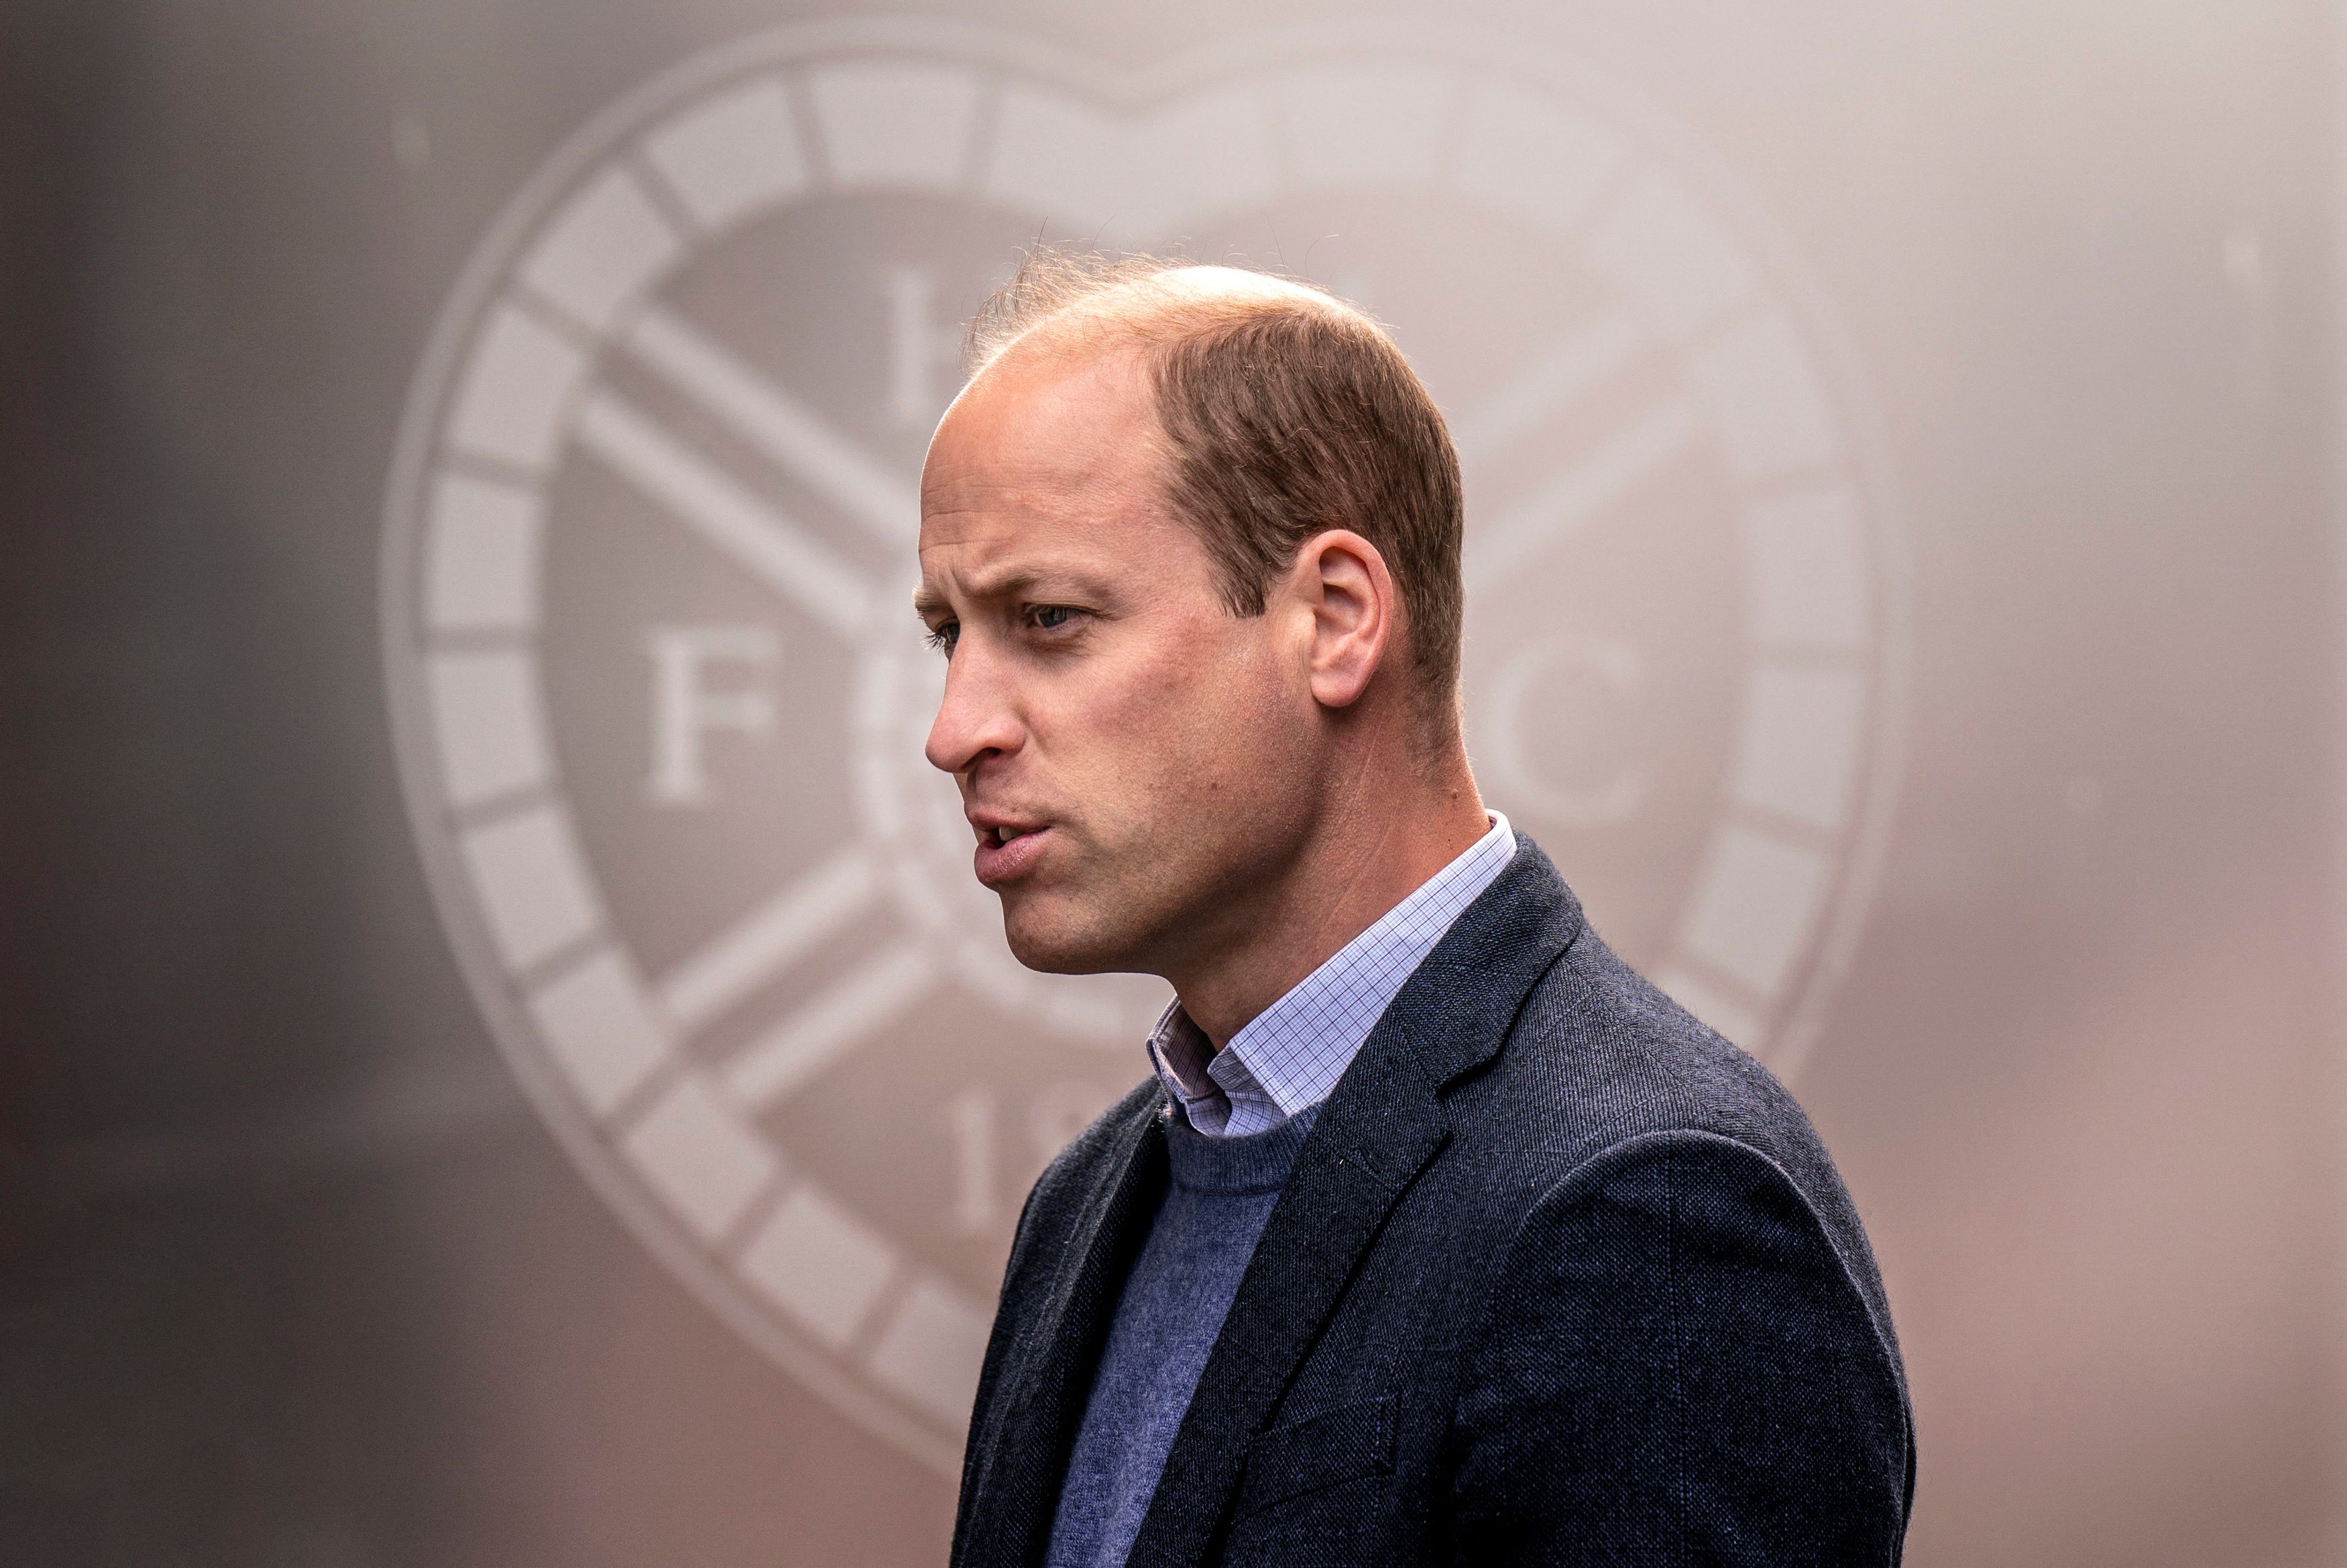 Britain's Prince William visits Heart of Midlothian Football Club to watch a programme called 'The Changing Room' in Edinburgh, Scotland